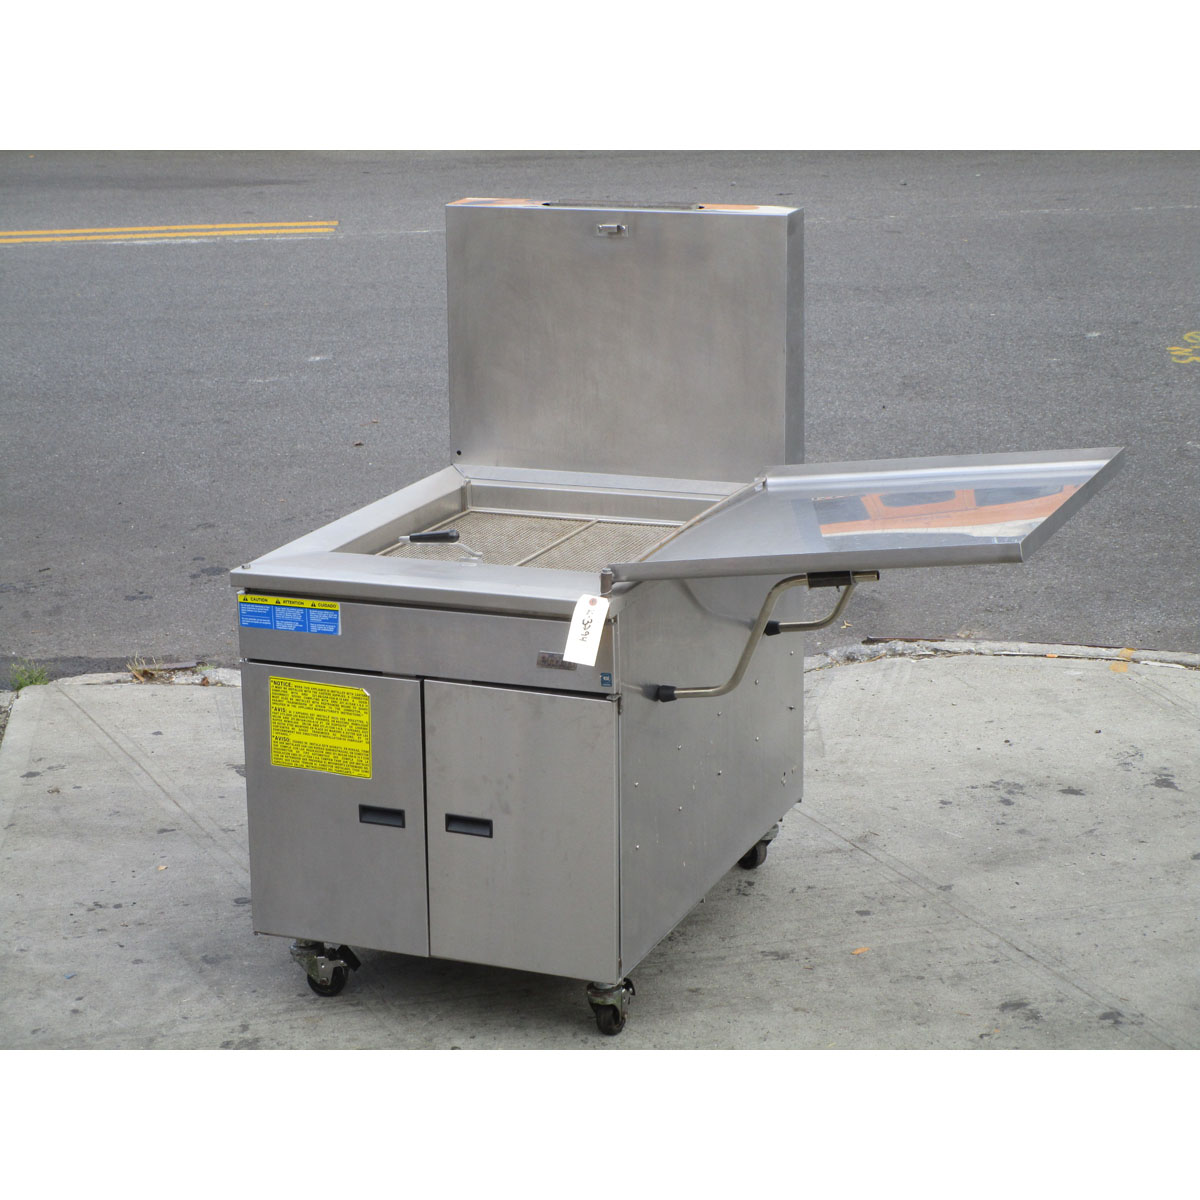 Pitco Donut Gas Fryer Model 24P, Excellent Condition